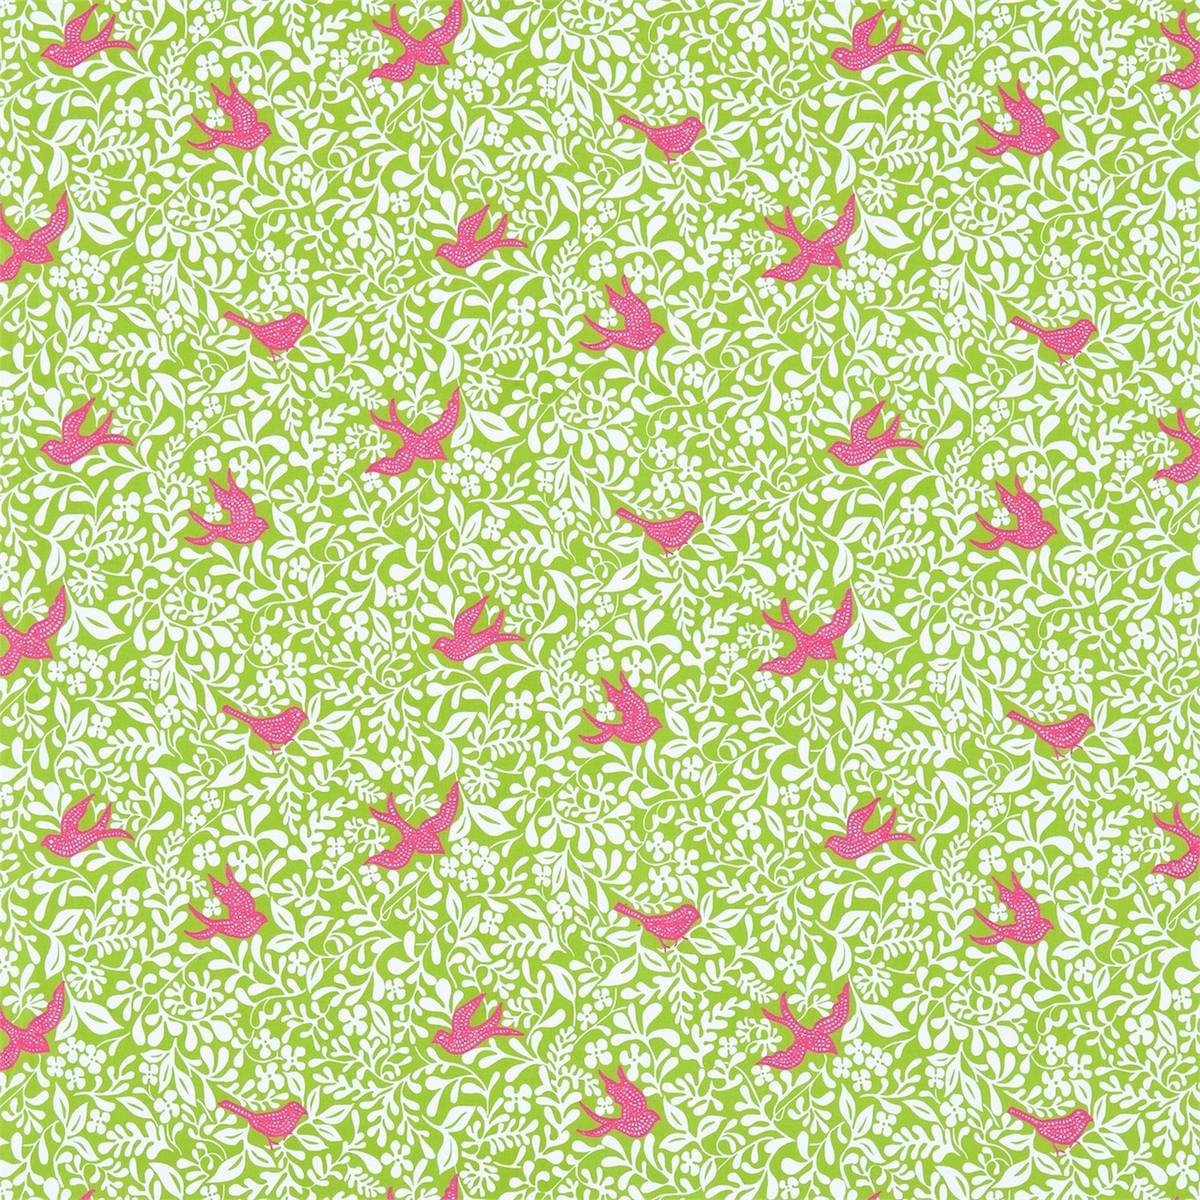 Larksong Lime/Cerise Fabric by Sanderson